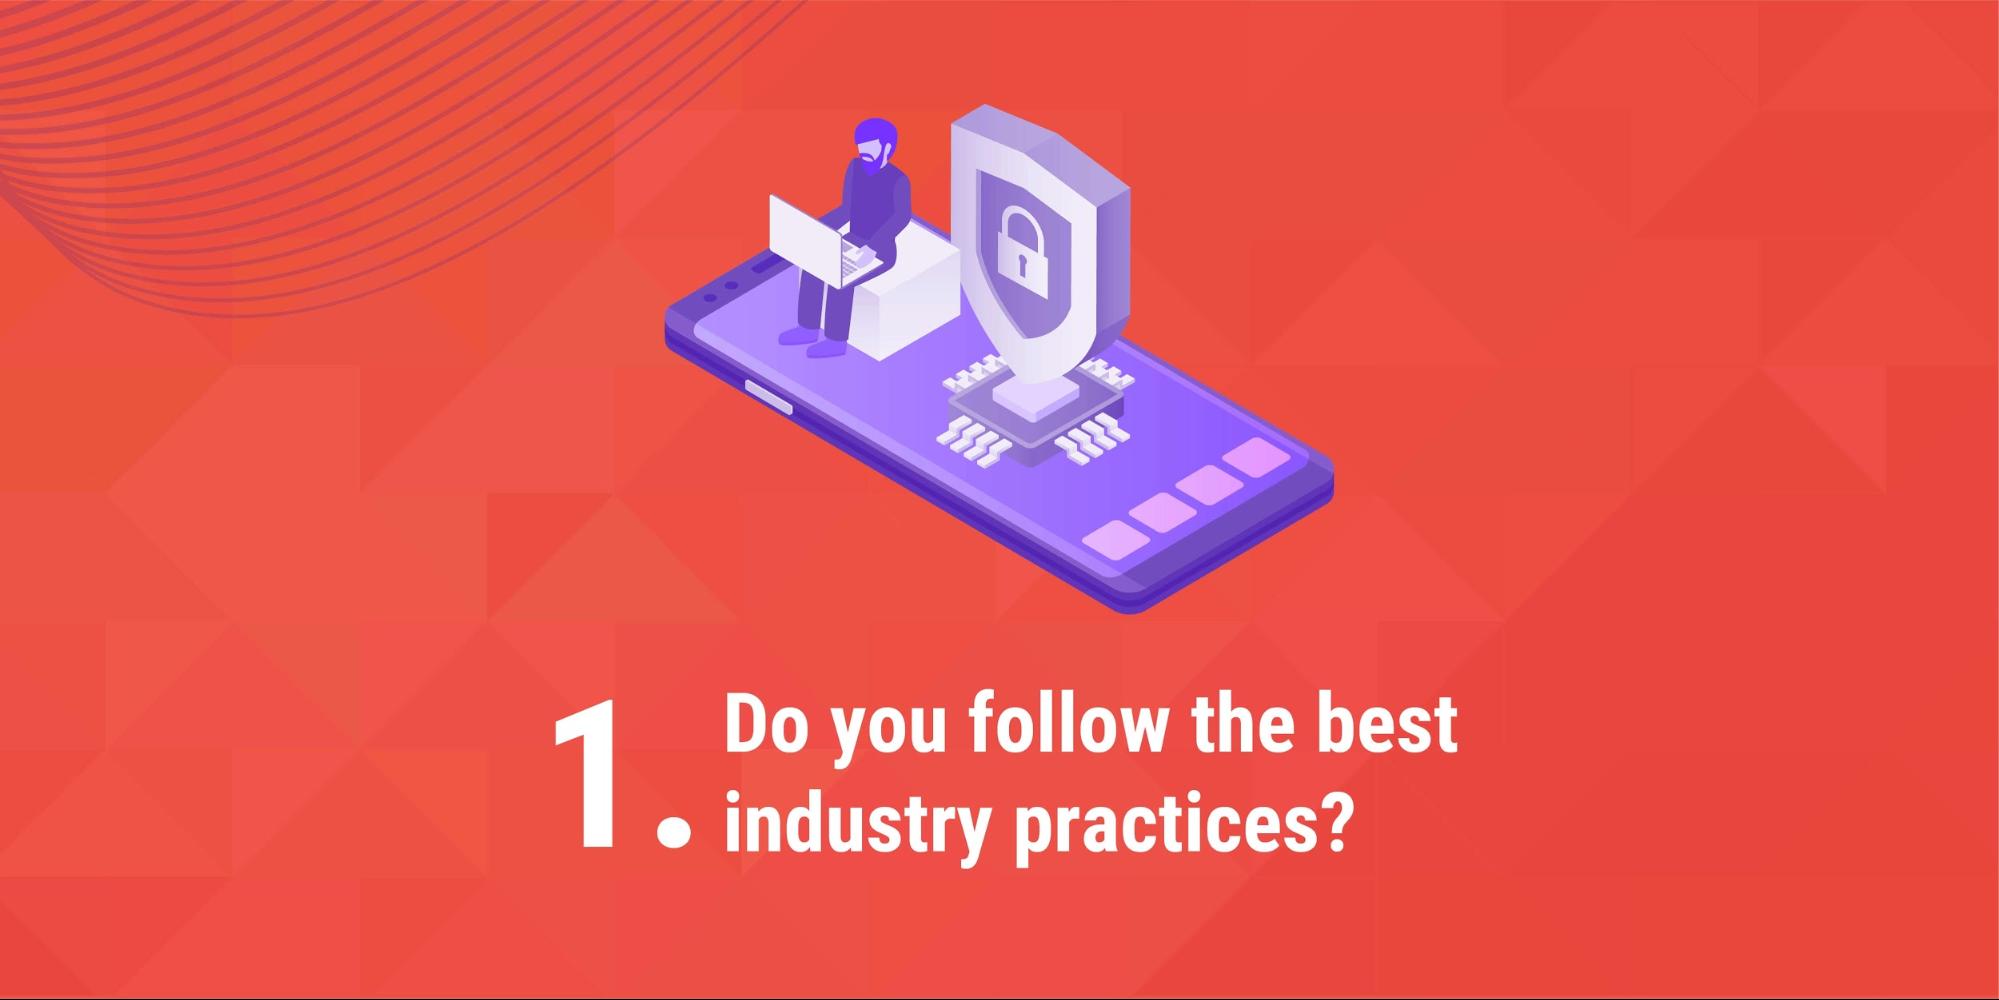 1. Do you follow the best industry practices?